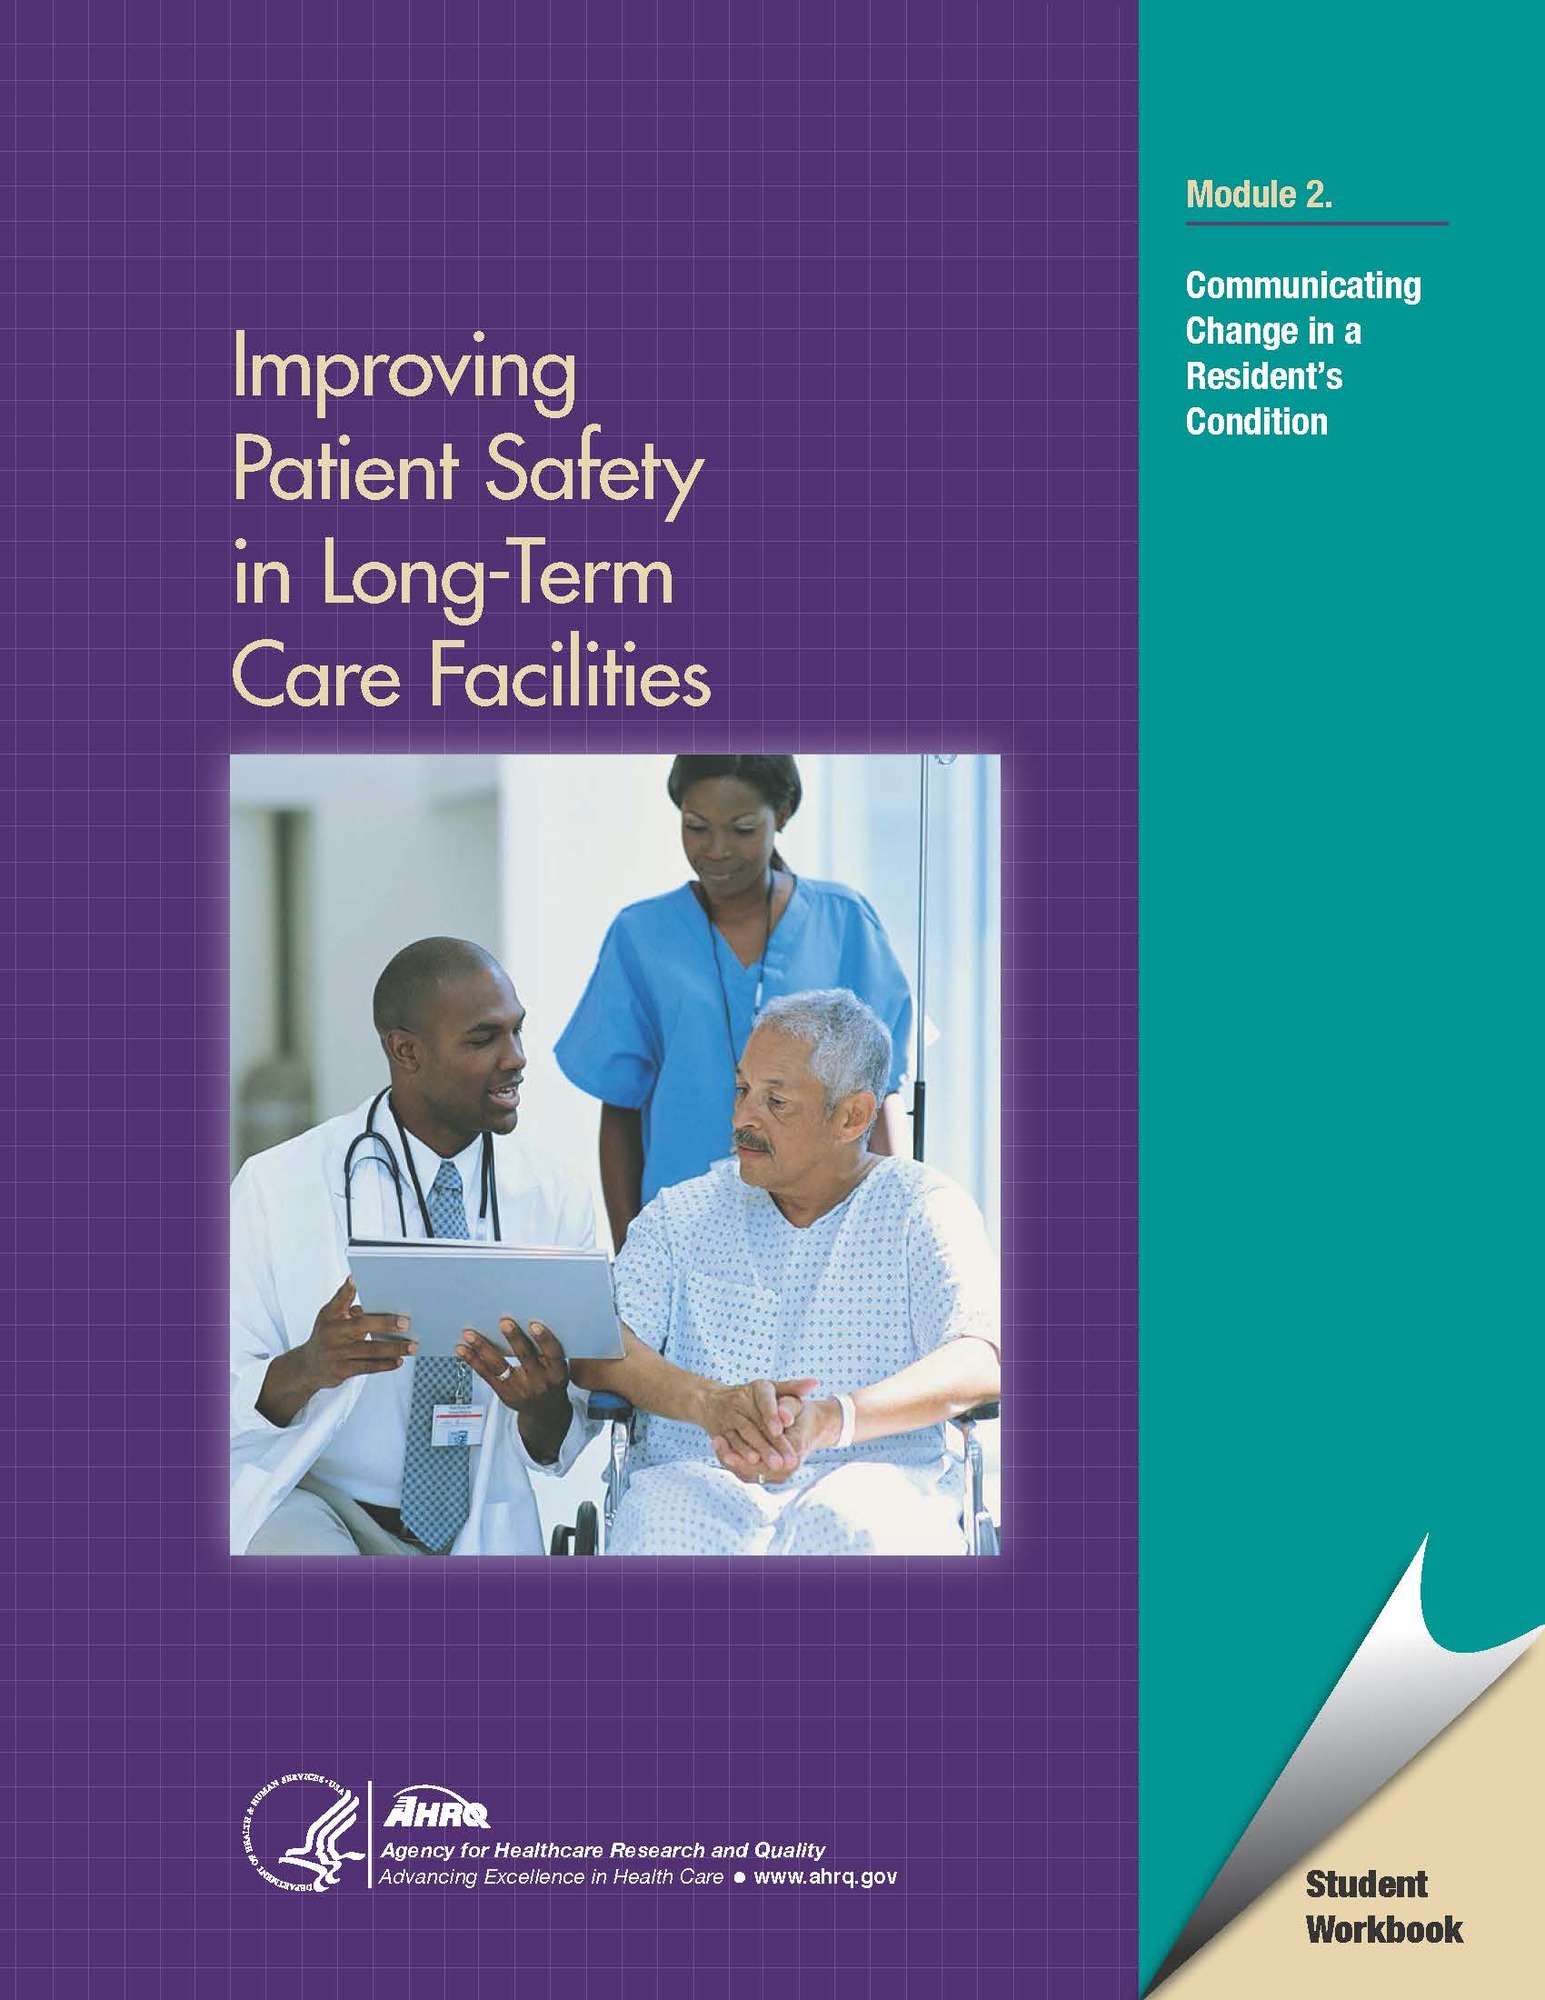 AHRQ_Image_Improving Patient Safety in Long-Term Care Facilities: Communicating Change in a Resident's Condition